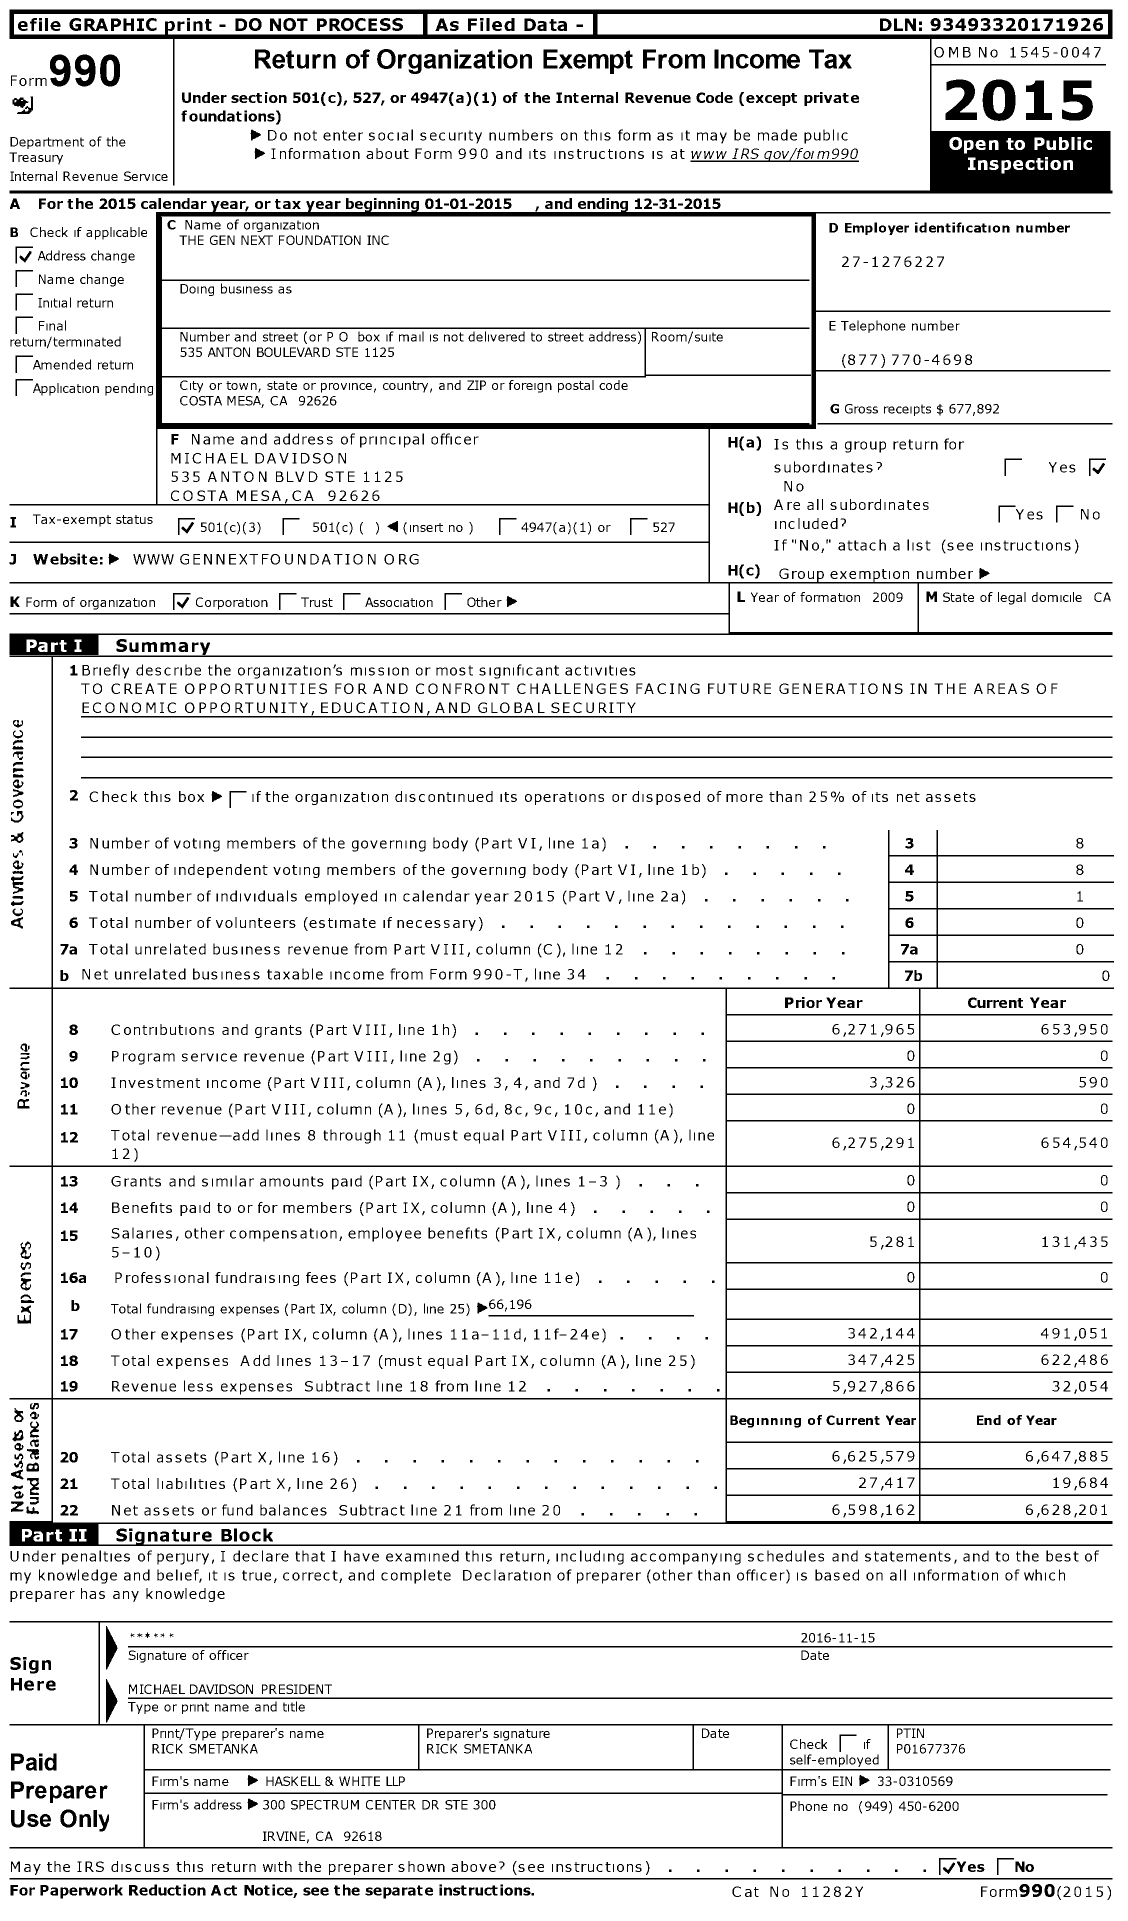 Image of first page of 2015 Form 990 for The Gen Next Foundation